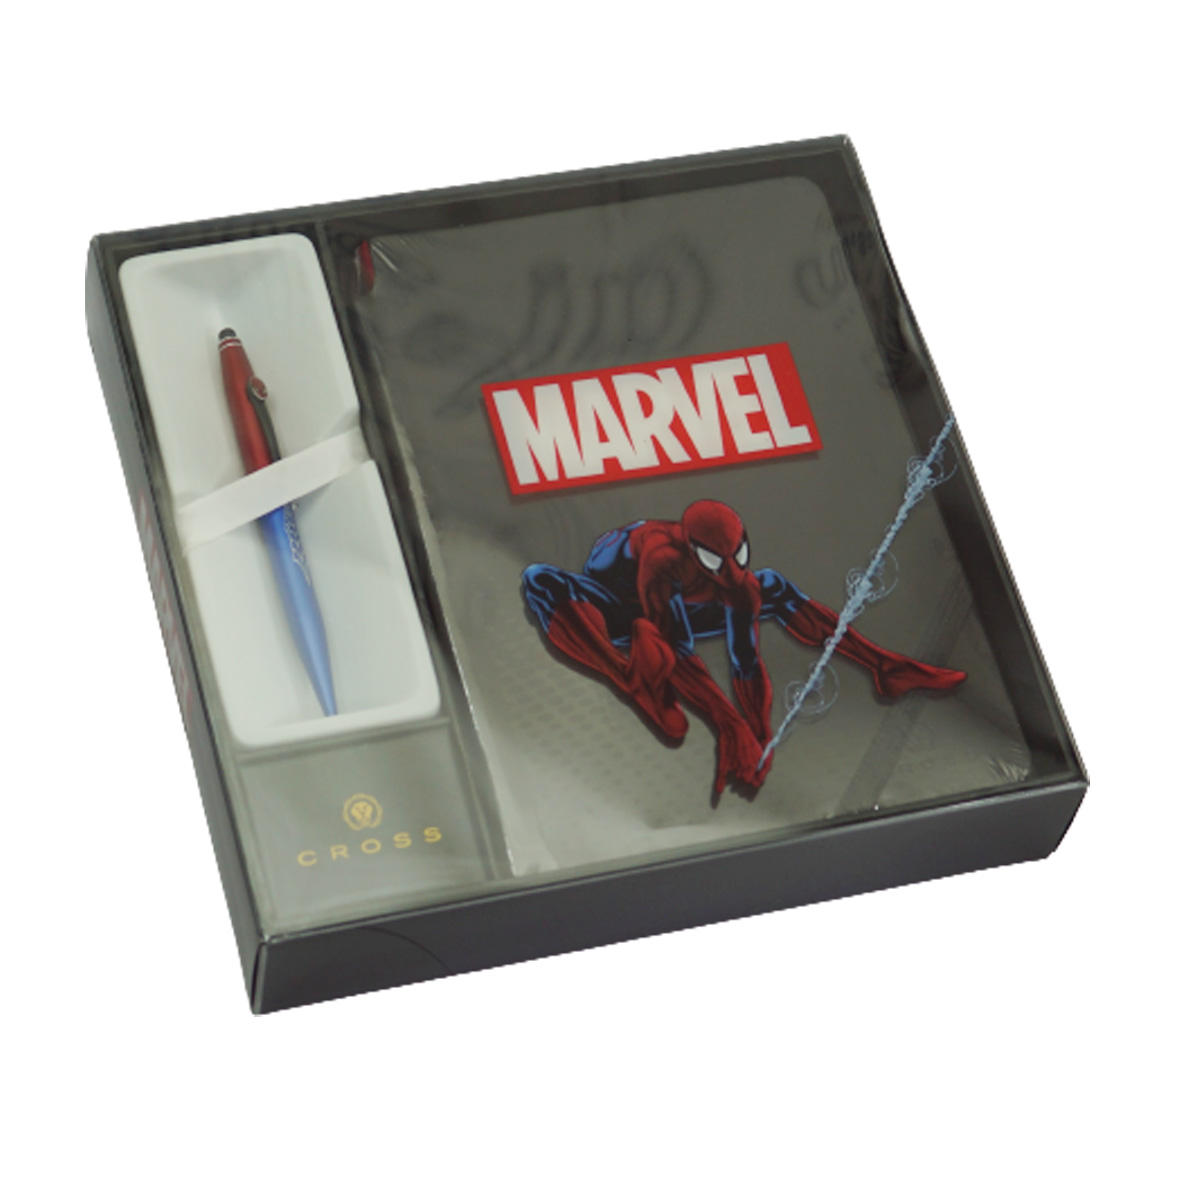 Cross Marvel Mat Blue Color Body With Red Color Cap And Black Clip Medium Tip Twist Type Ball Pen Gift Set  SKU 23136